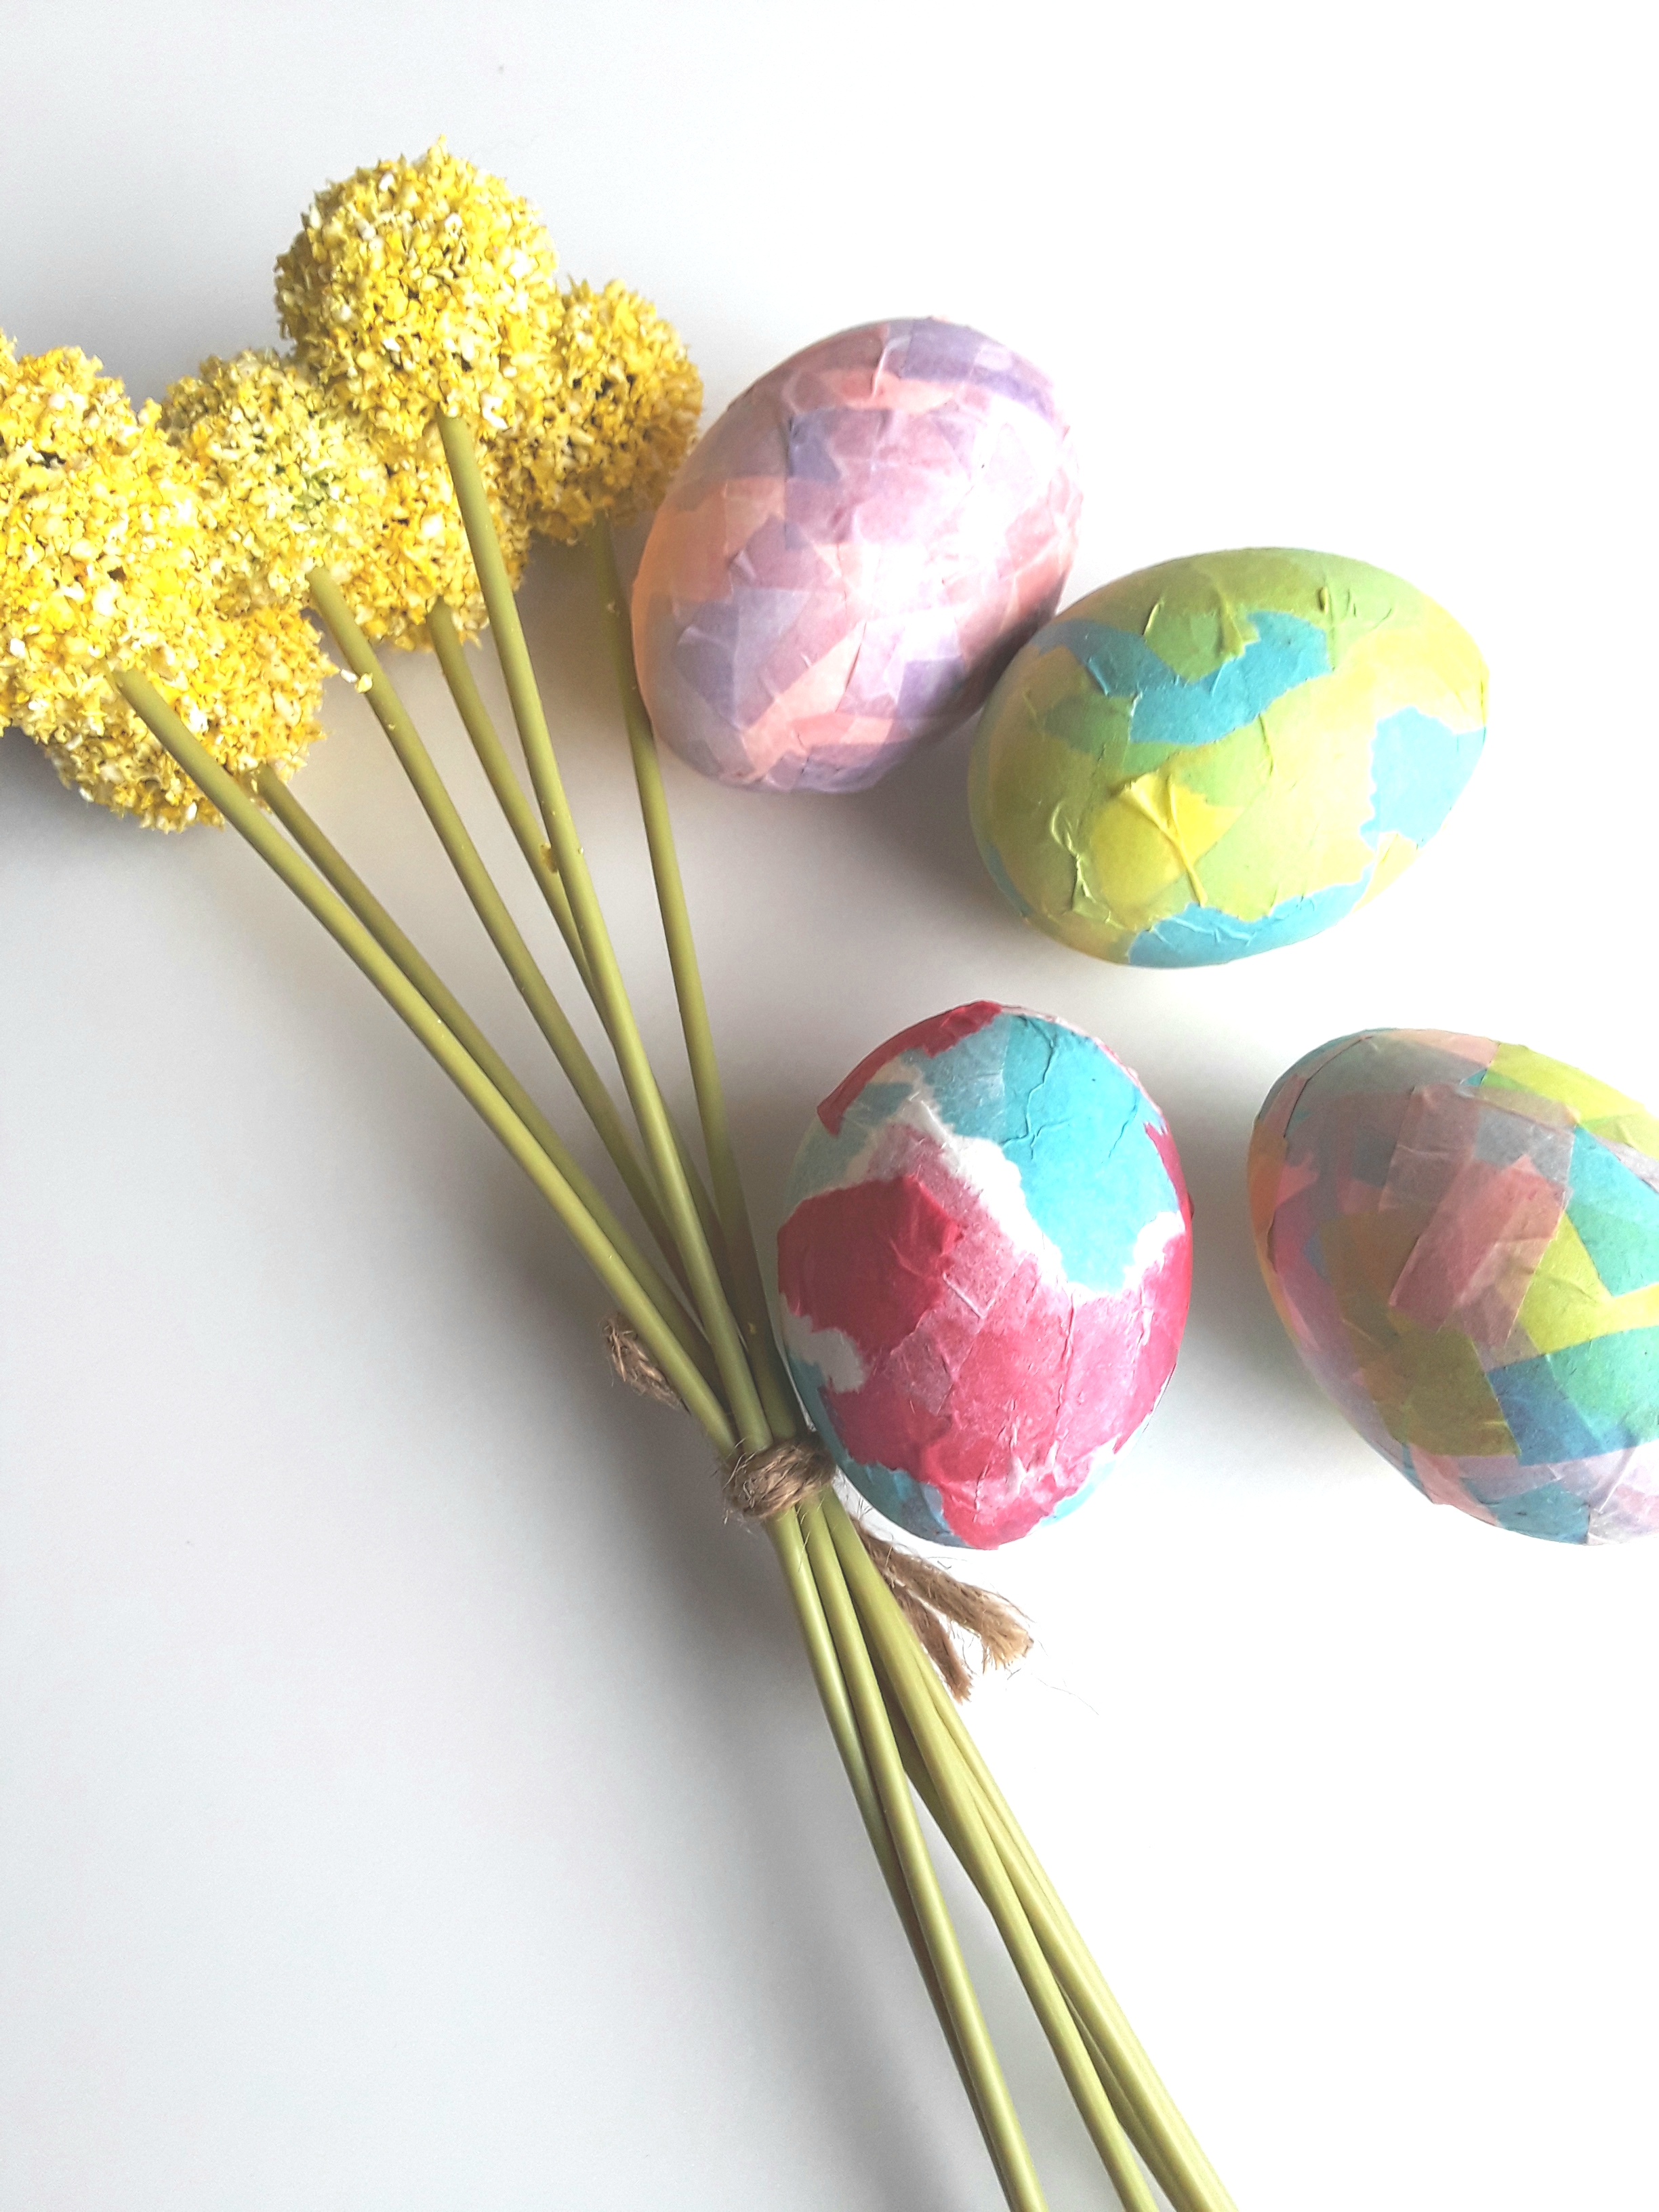 Blown-out eggs are coated with colored bits of tissue paper